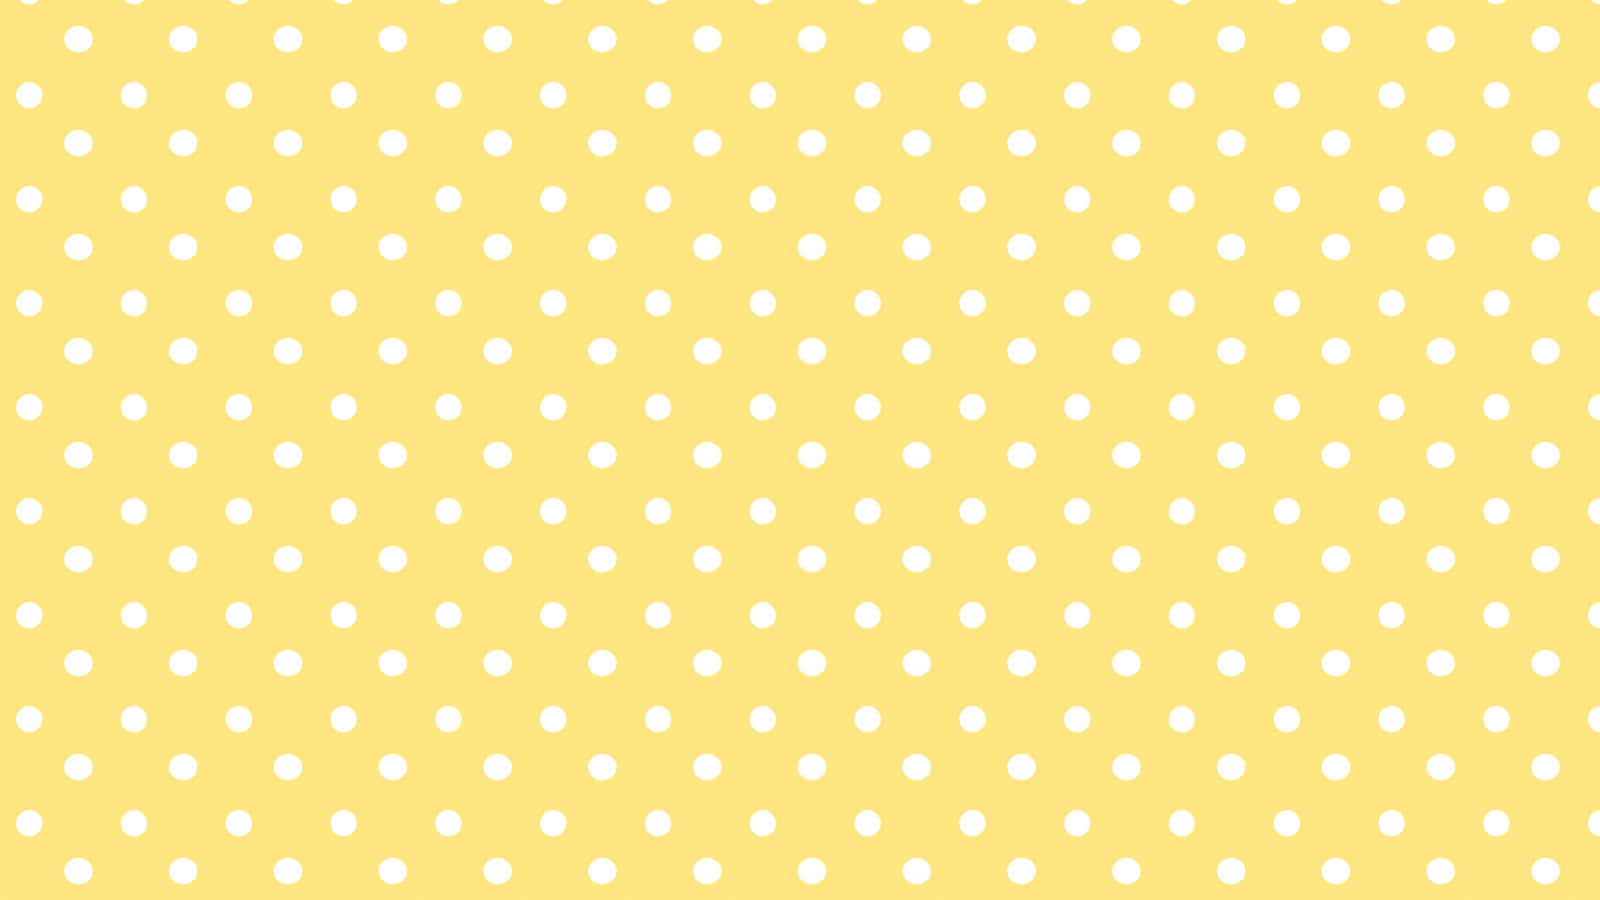 Download A cute yellow background, at once cheerful and serene ...